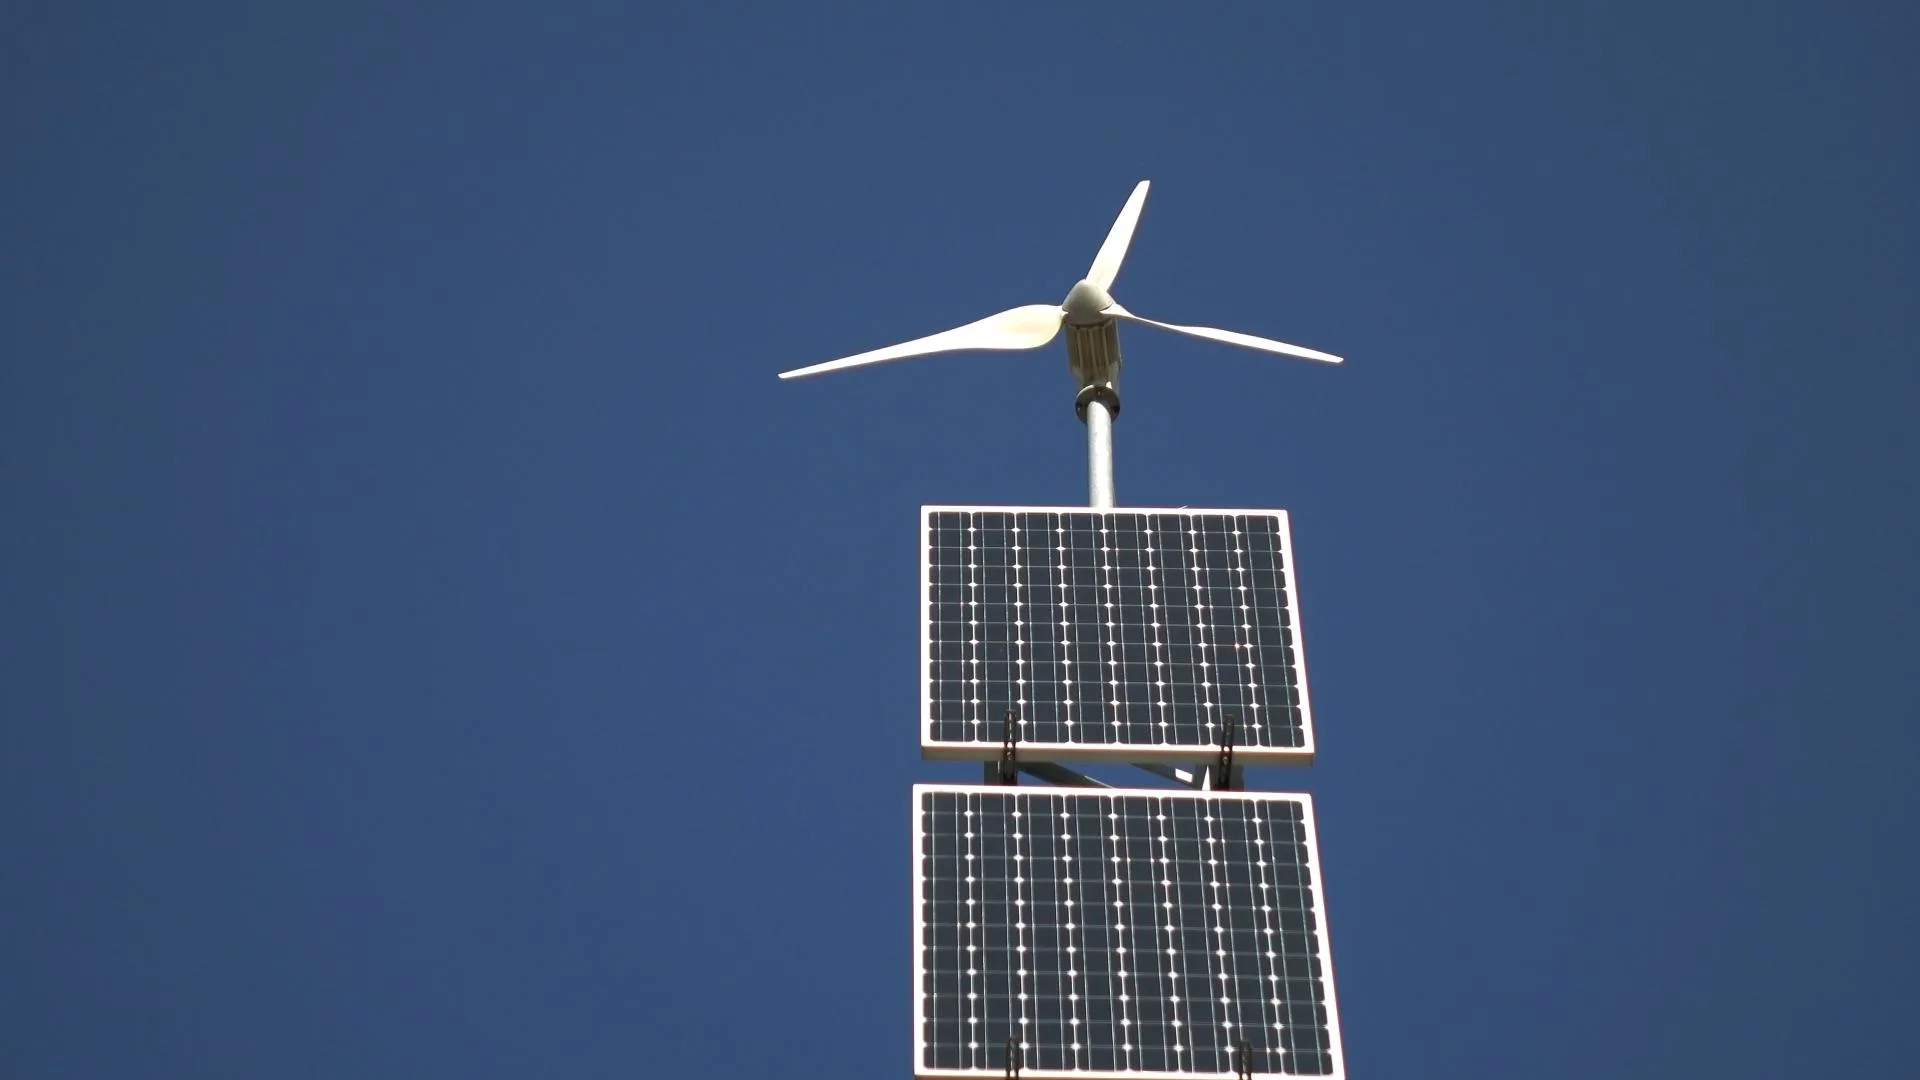 Photo of a wind turbine being used in conjunction with two solar panels